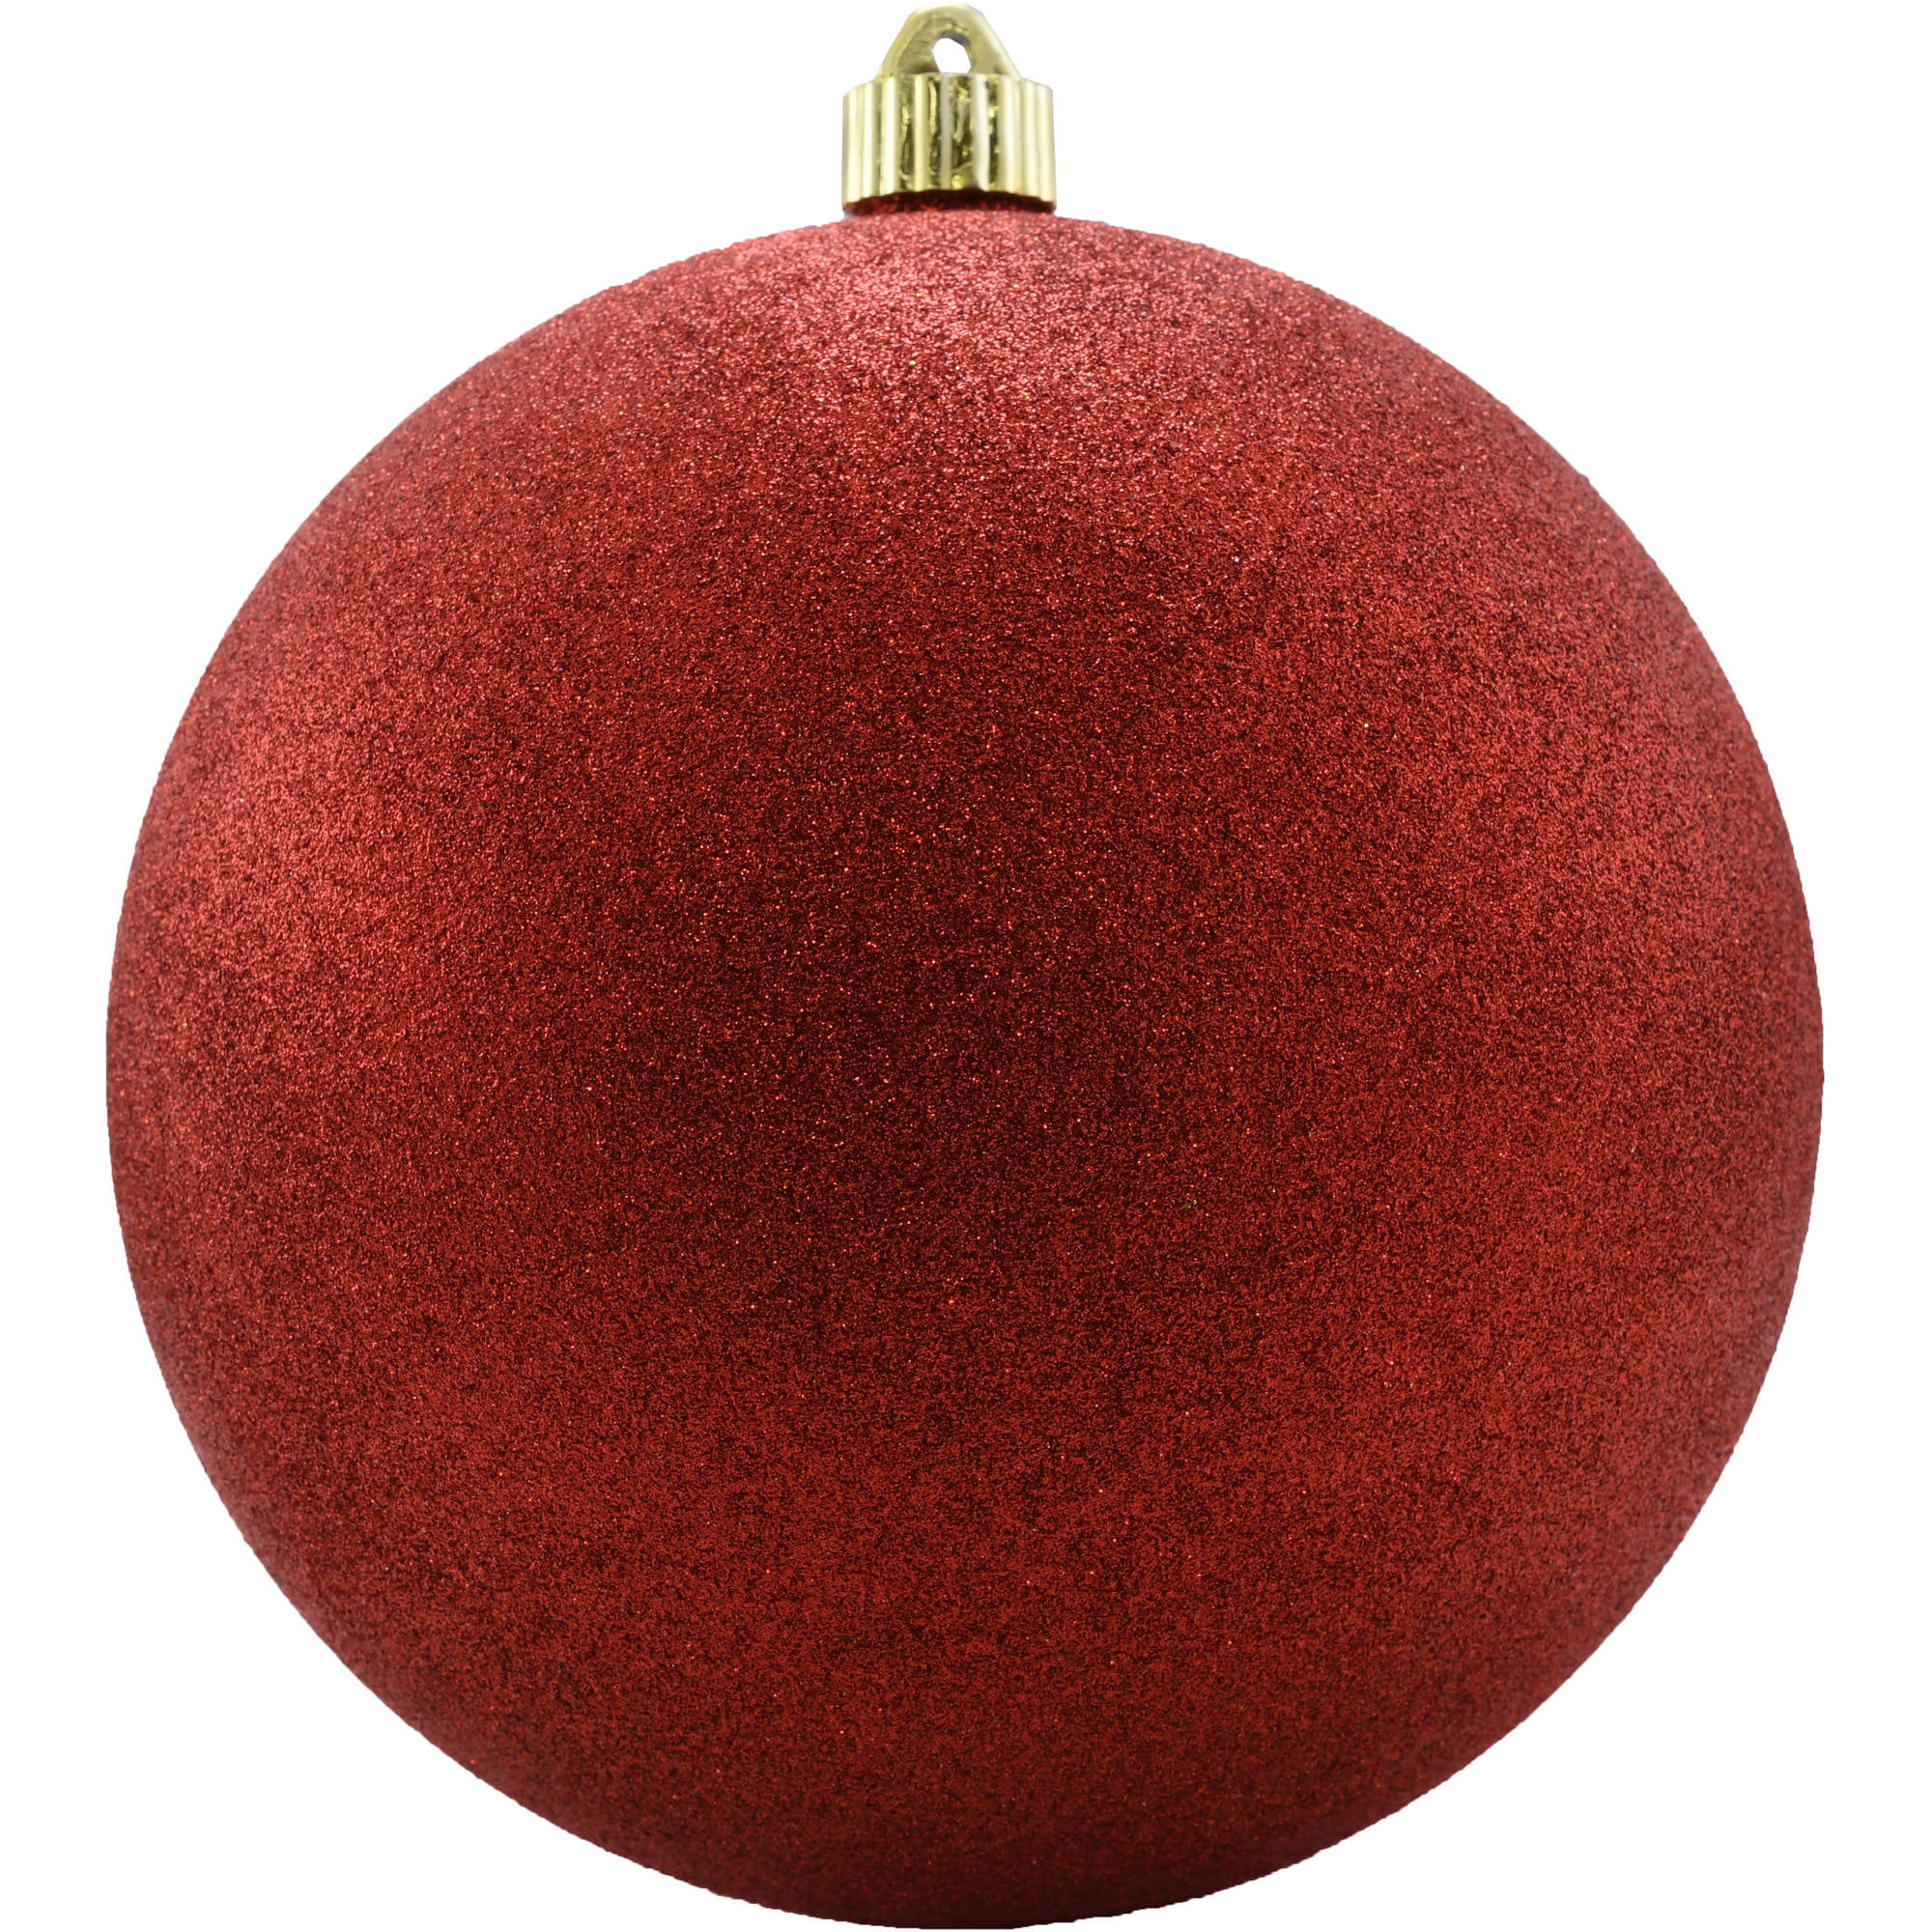 EMMA Personalized Collectible Ornament by GANZ Red Glitter Christmas Ball 